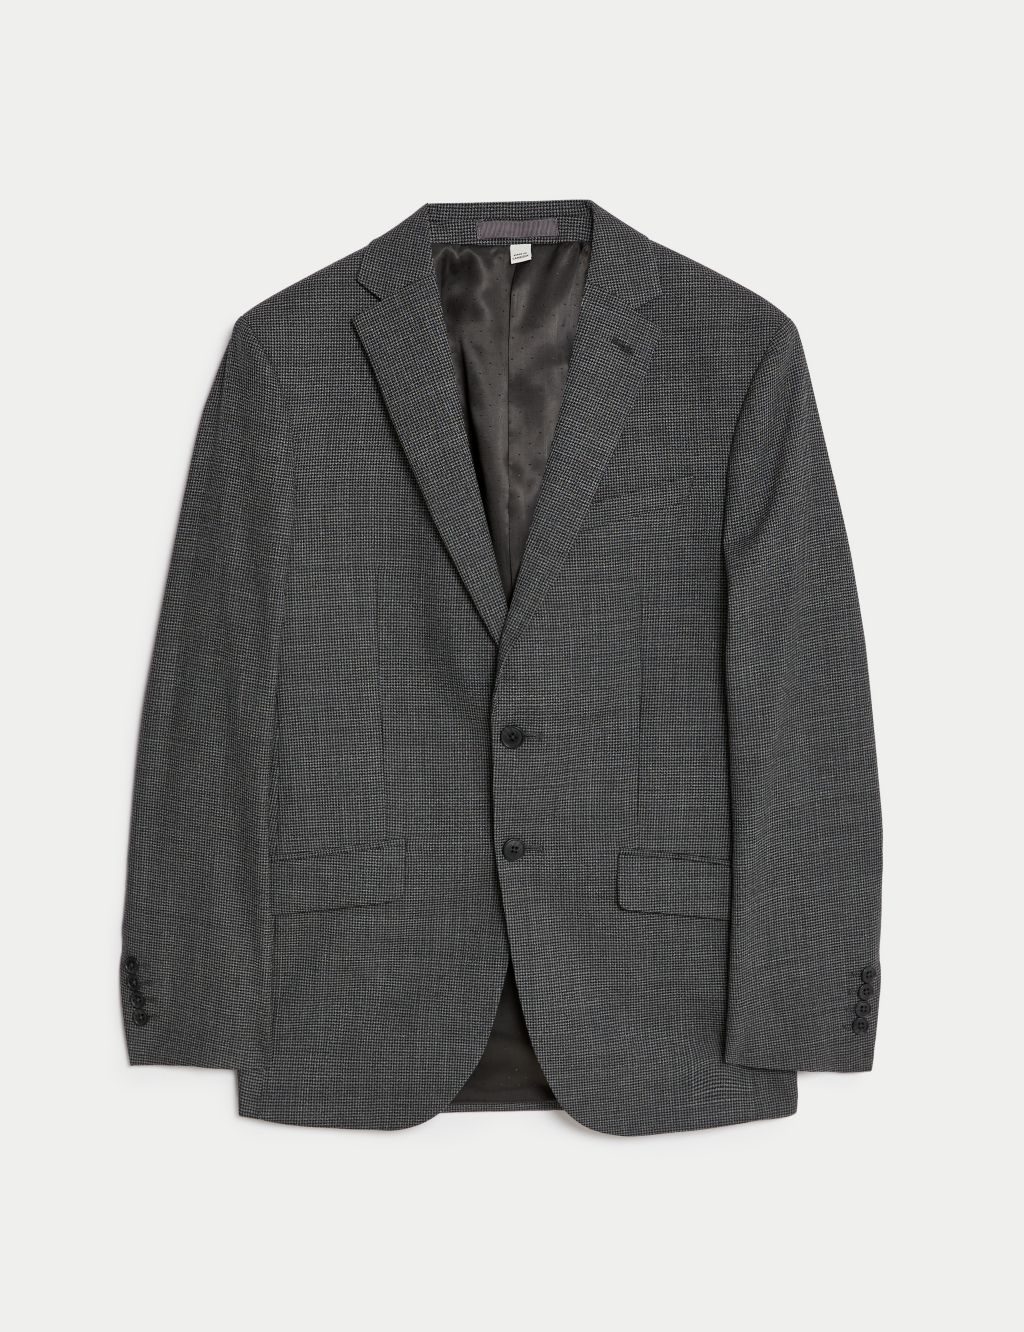 Tailored Fit Wool Blend Suit Jacket image 2